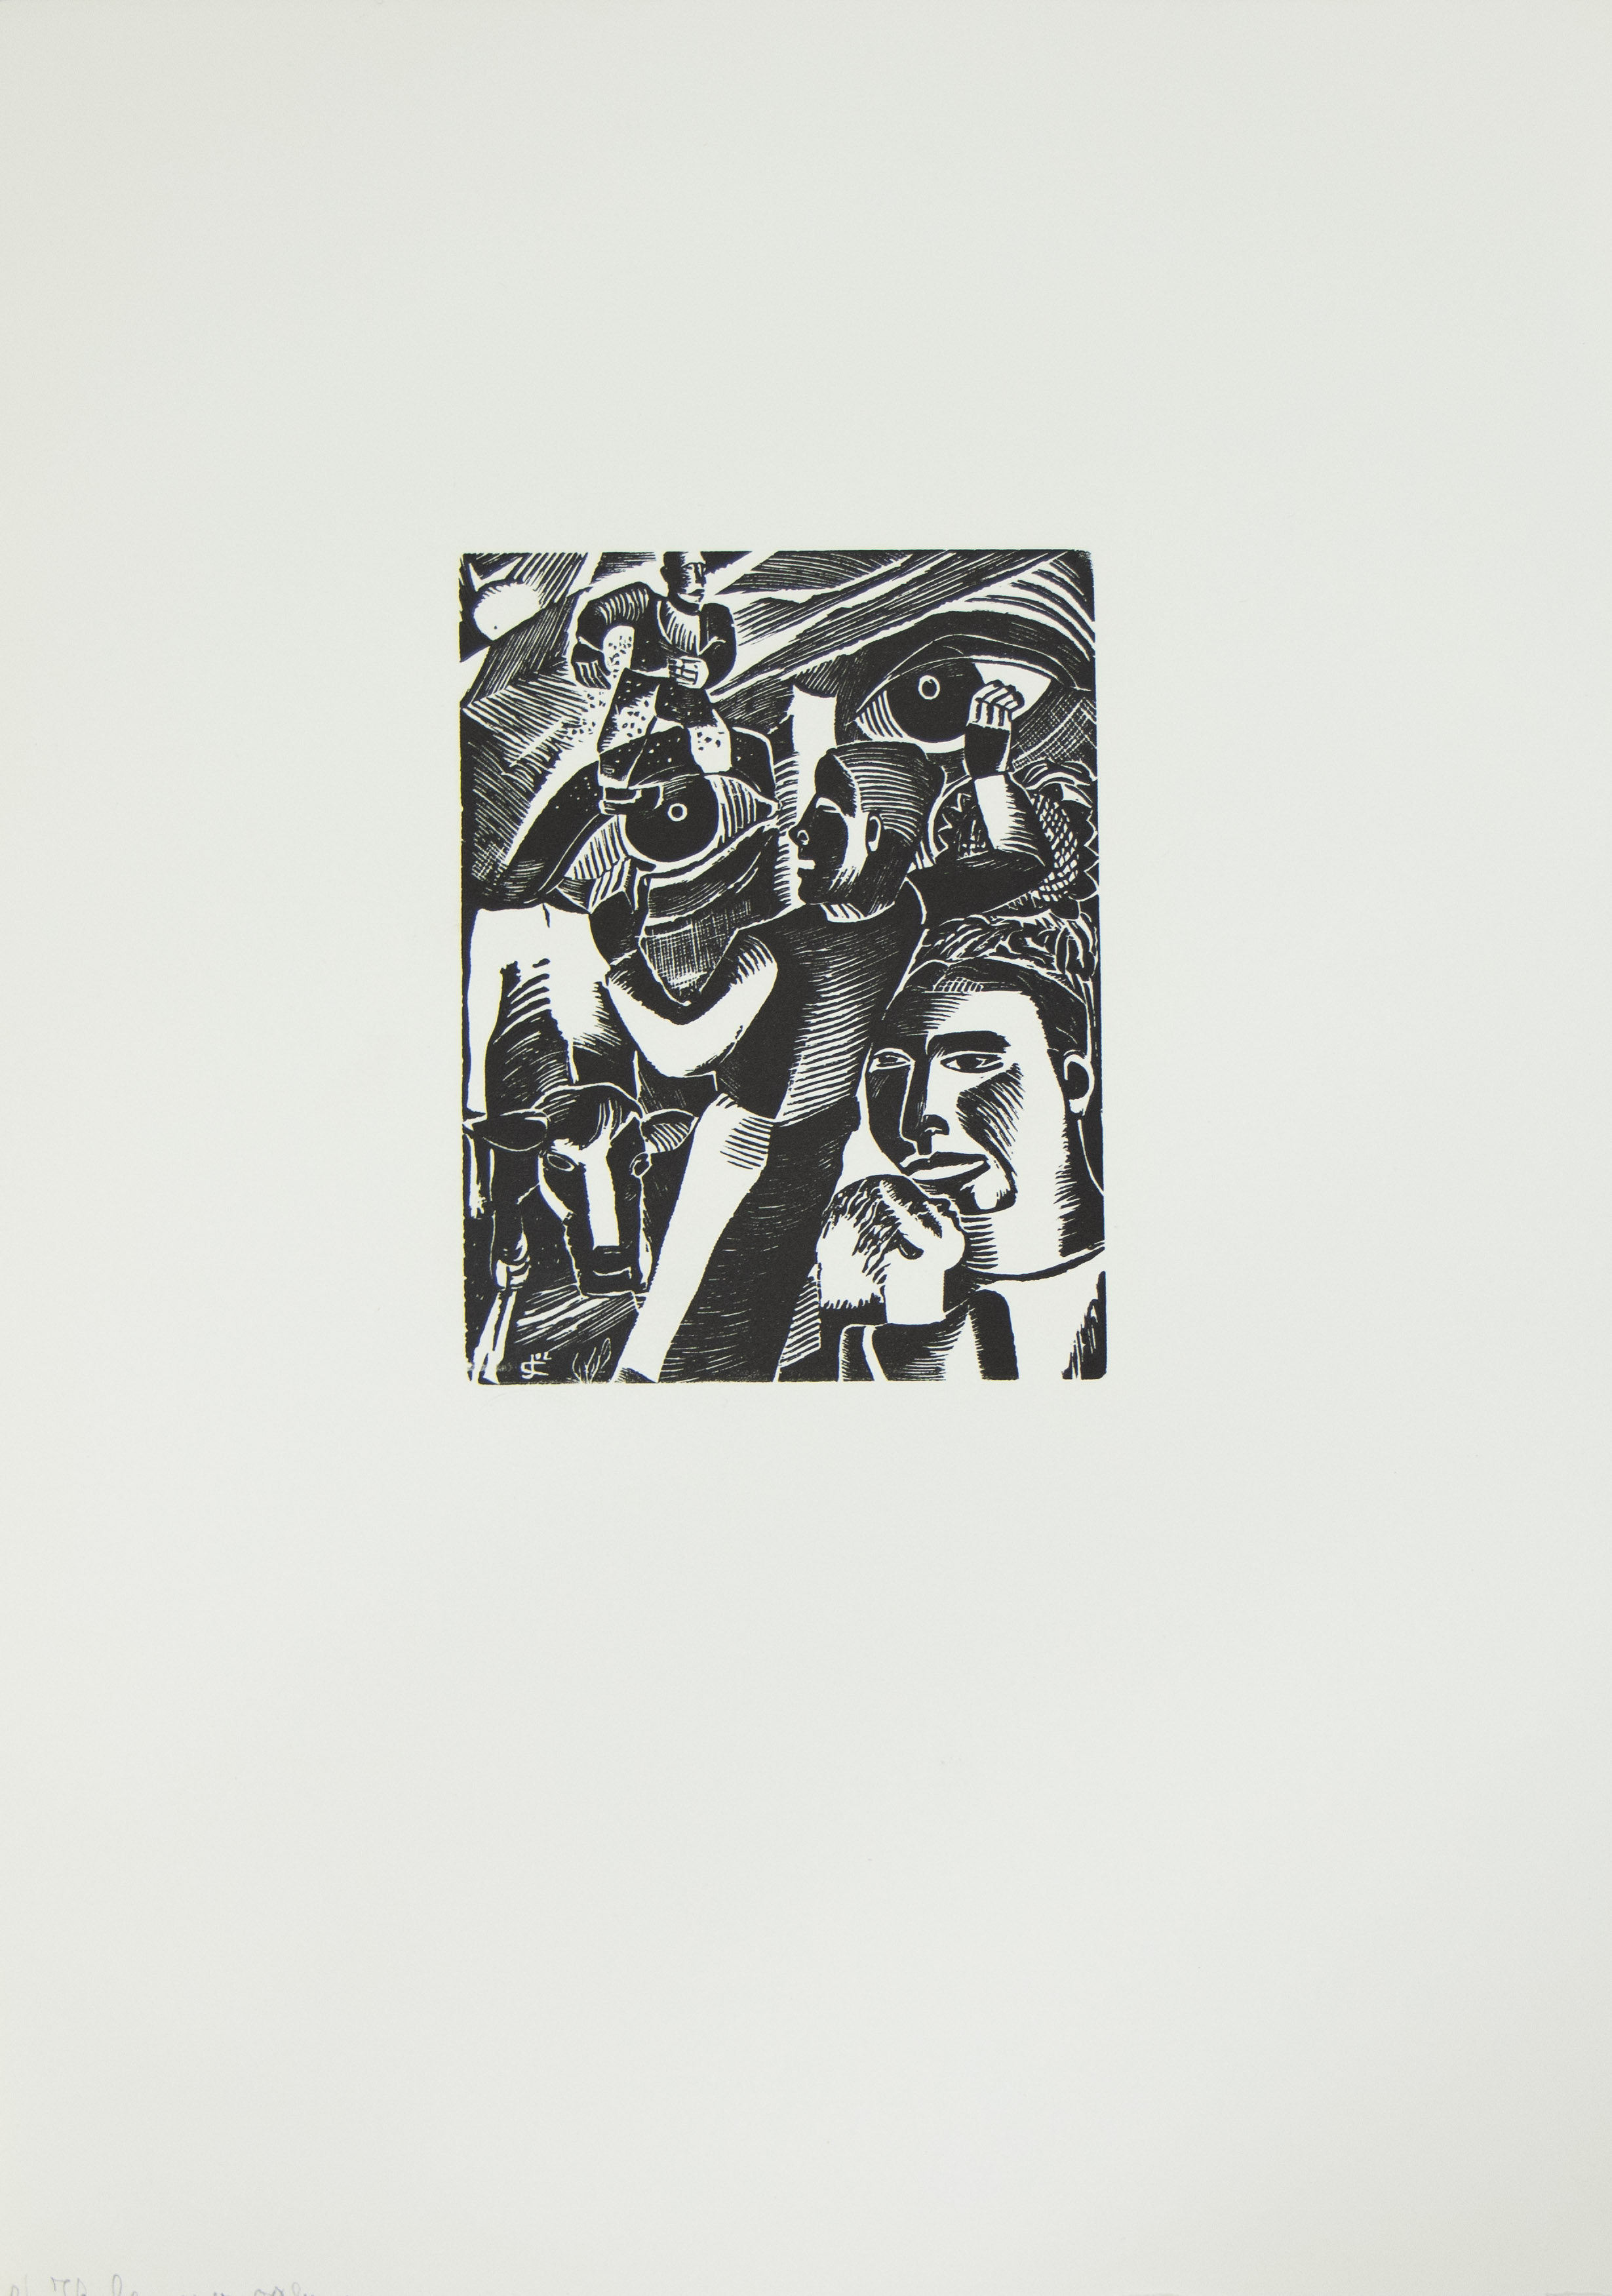 Jozef CANTRÉ (1890-1957), full stretch of woodcuts for 'the peasant dying' by Karel van de Woestijne - Image 10 of 16